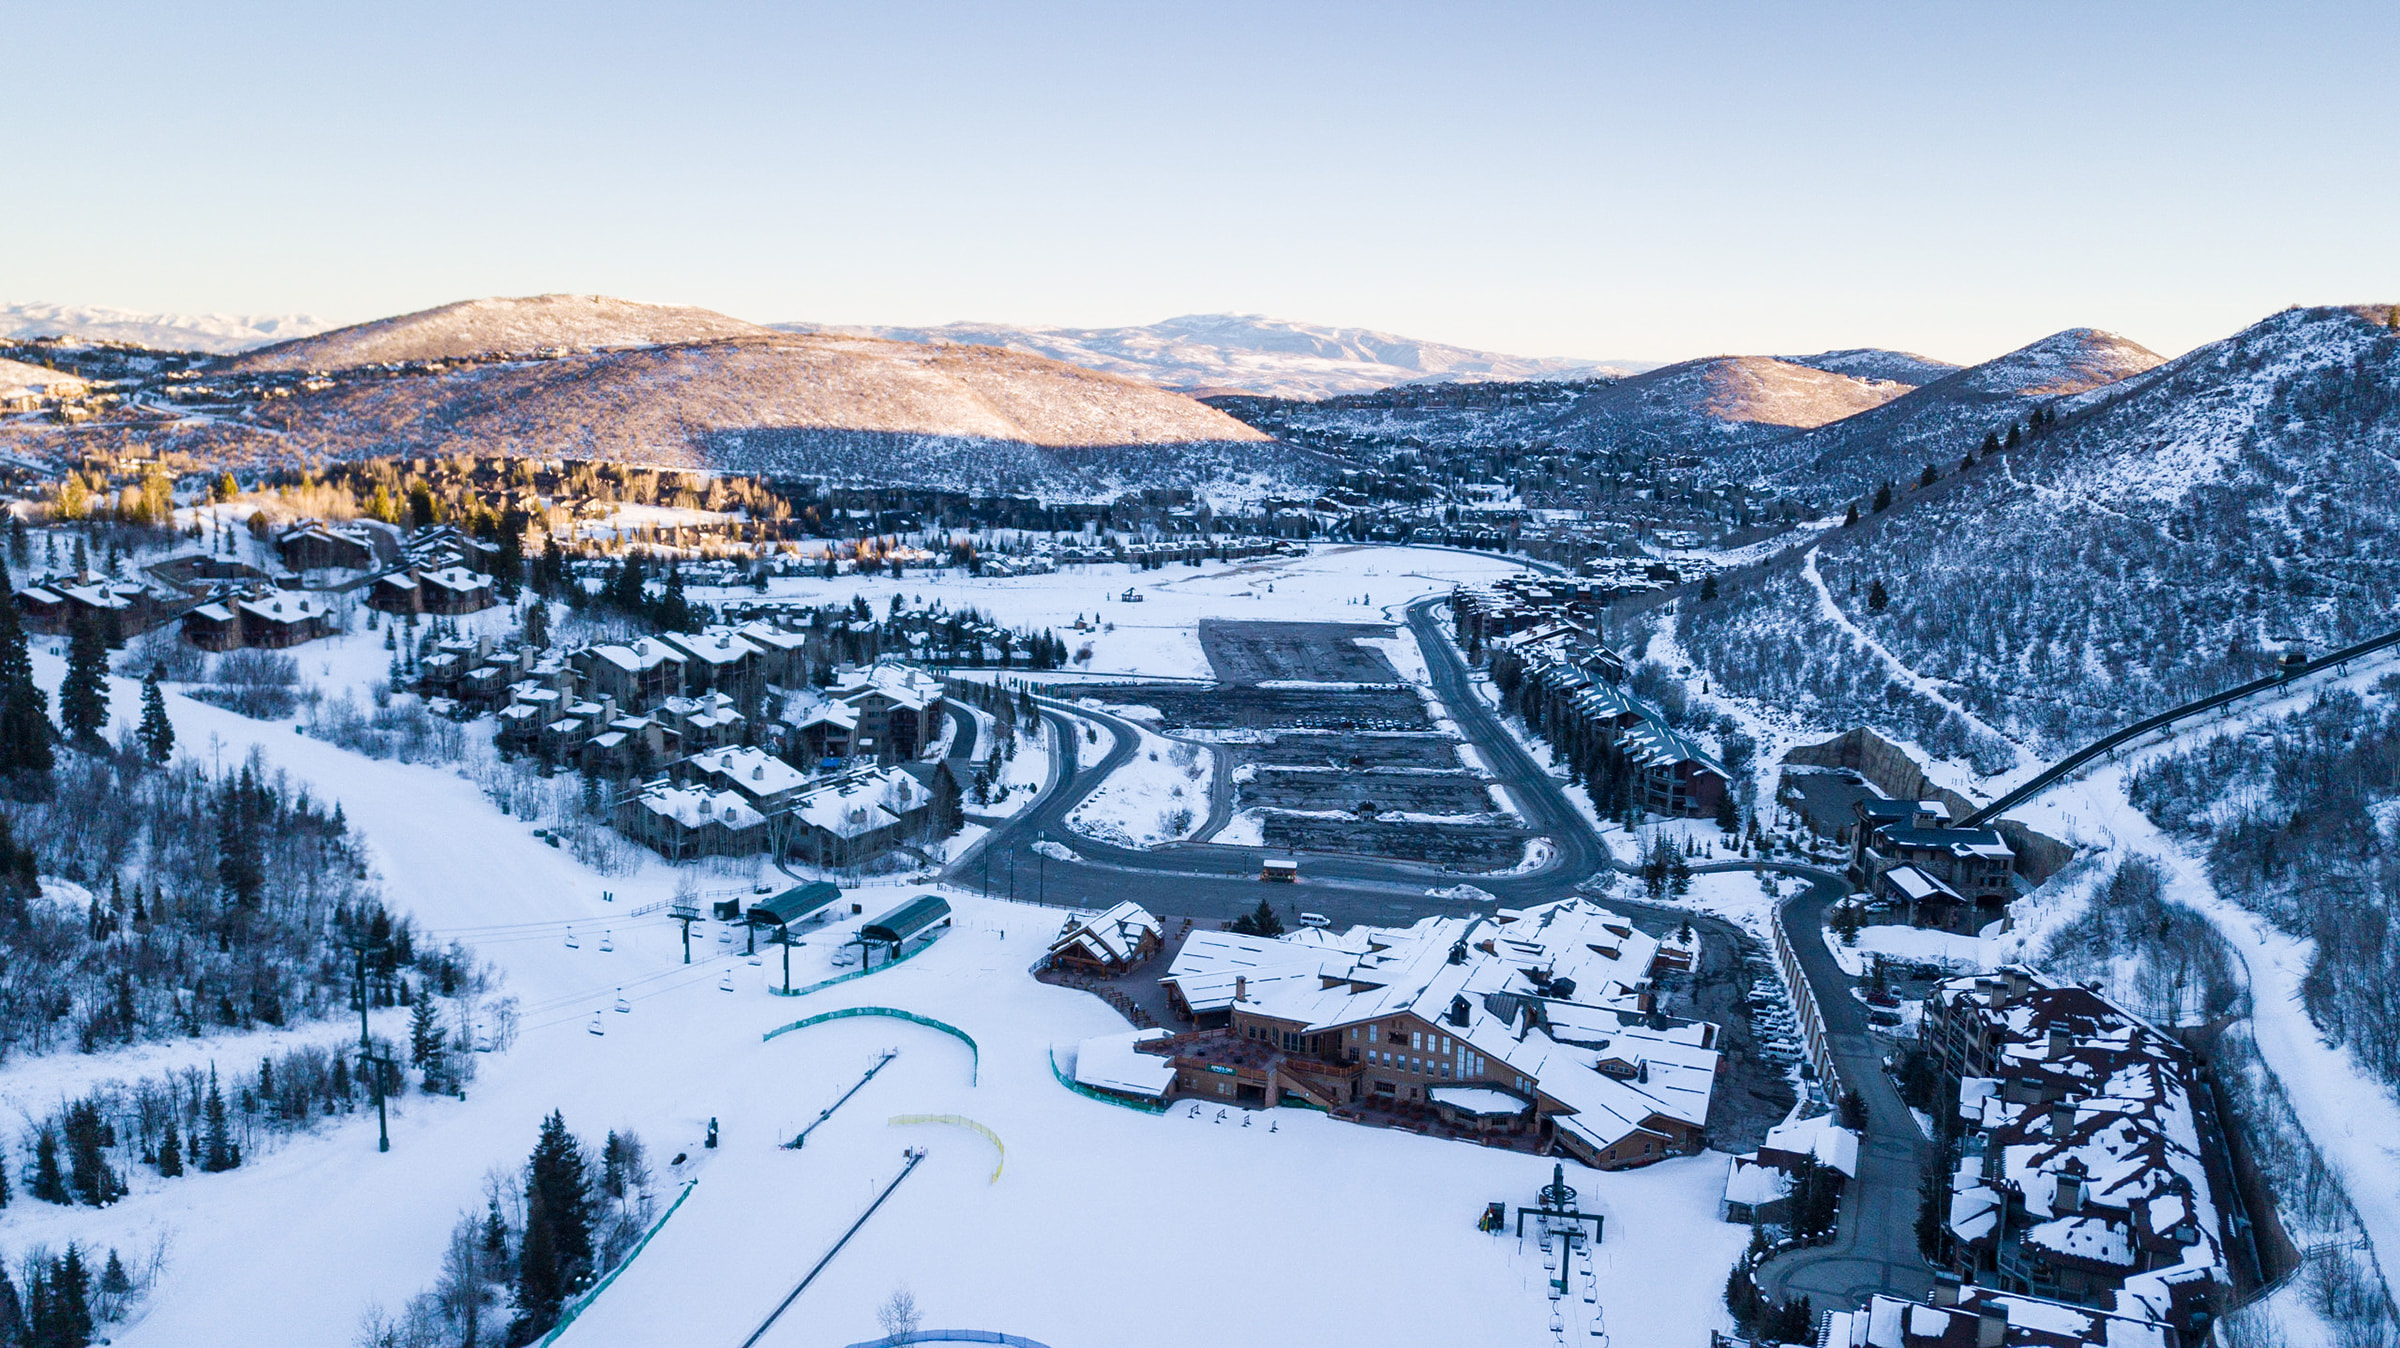 Drone image of Snow Park Lodge and parking lots during the winter season.